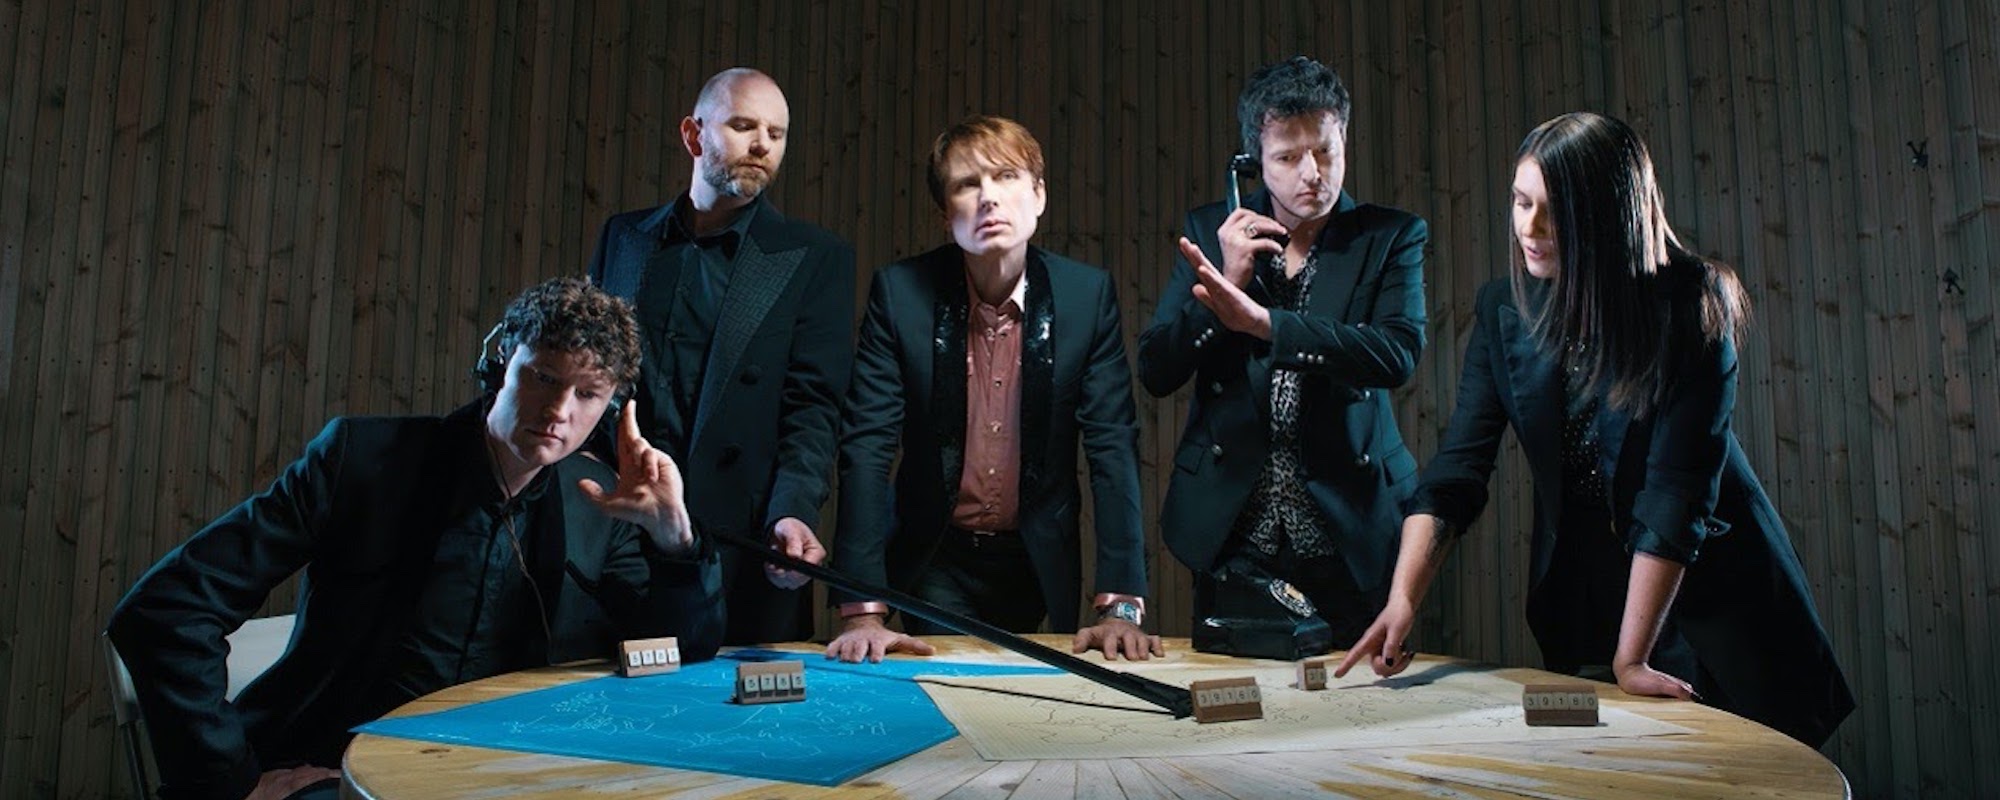 Behind The Song: “Take Me Out” by Franz Ferdinand